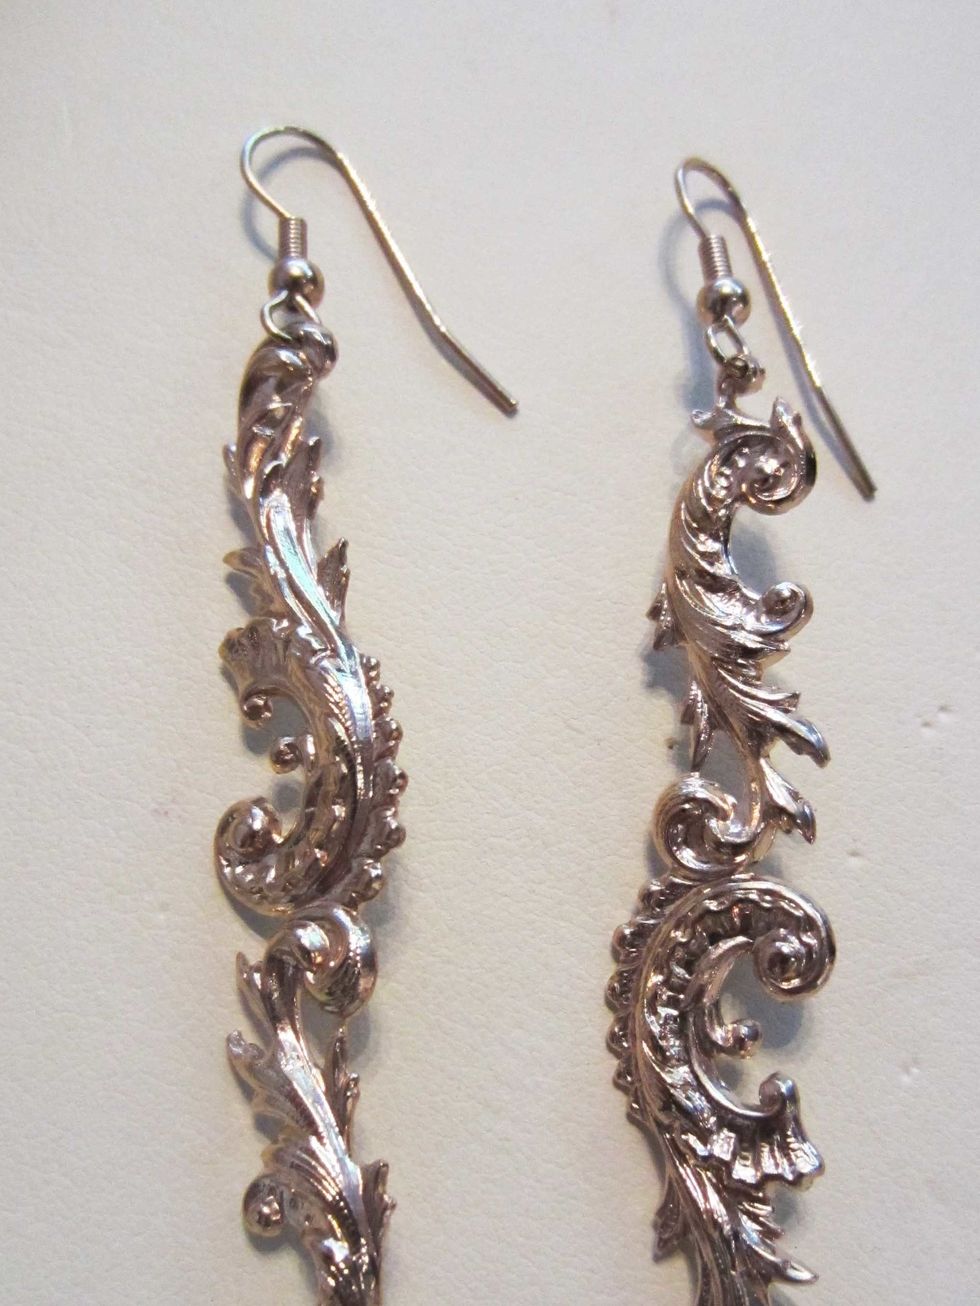 Metal, Natural material, Earrings, Art, Craft, Creative arts, Body jewelry, Silver, Bead, Jewelry making, 